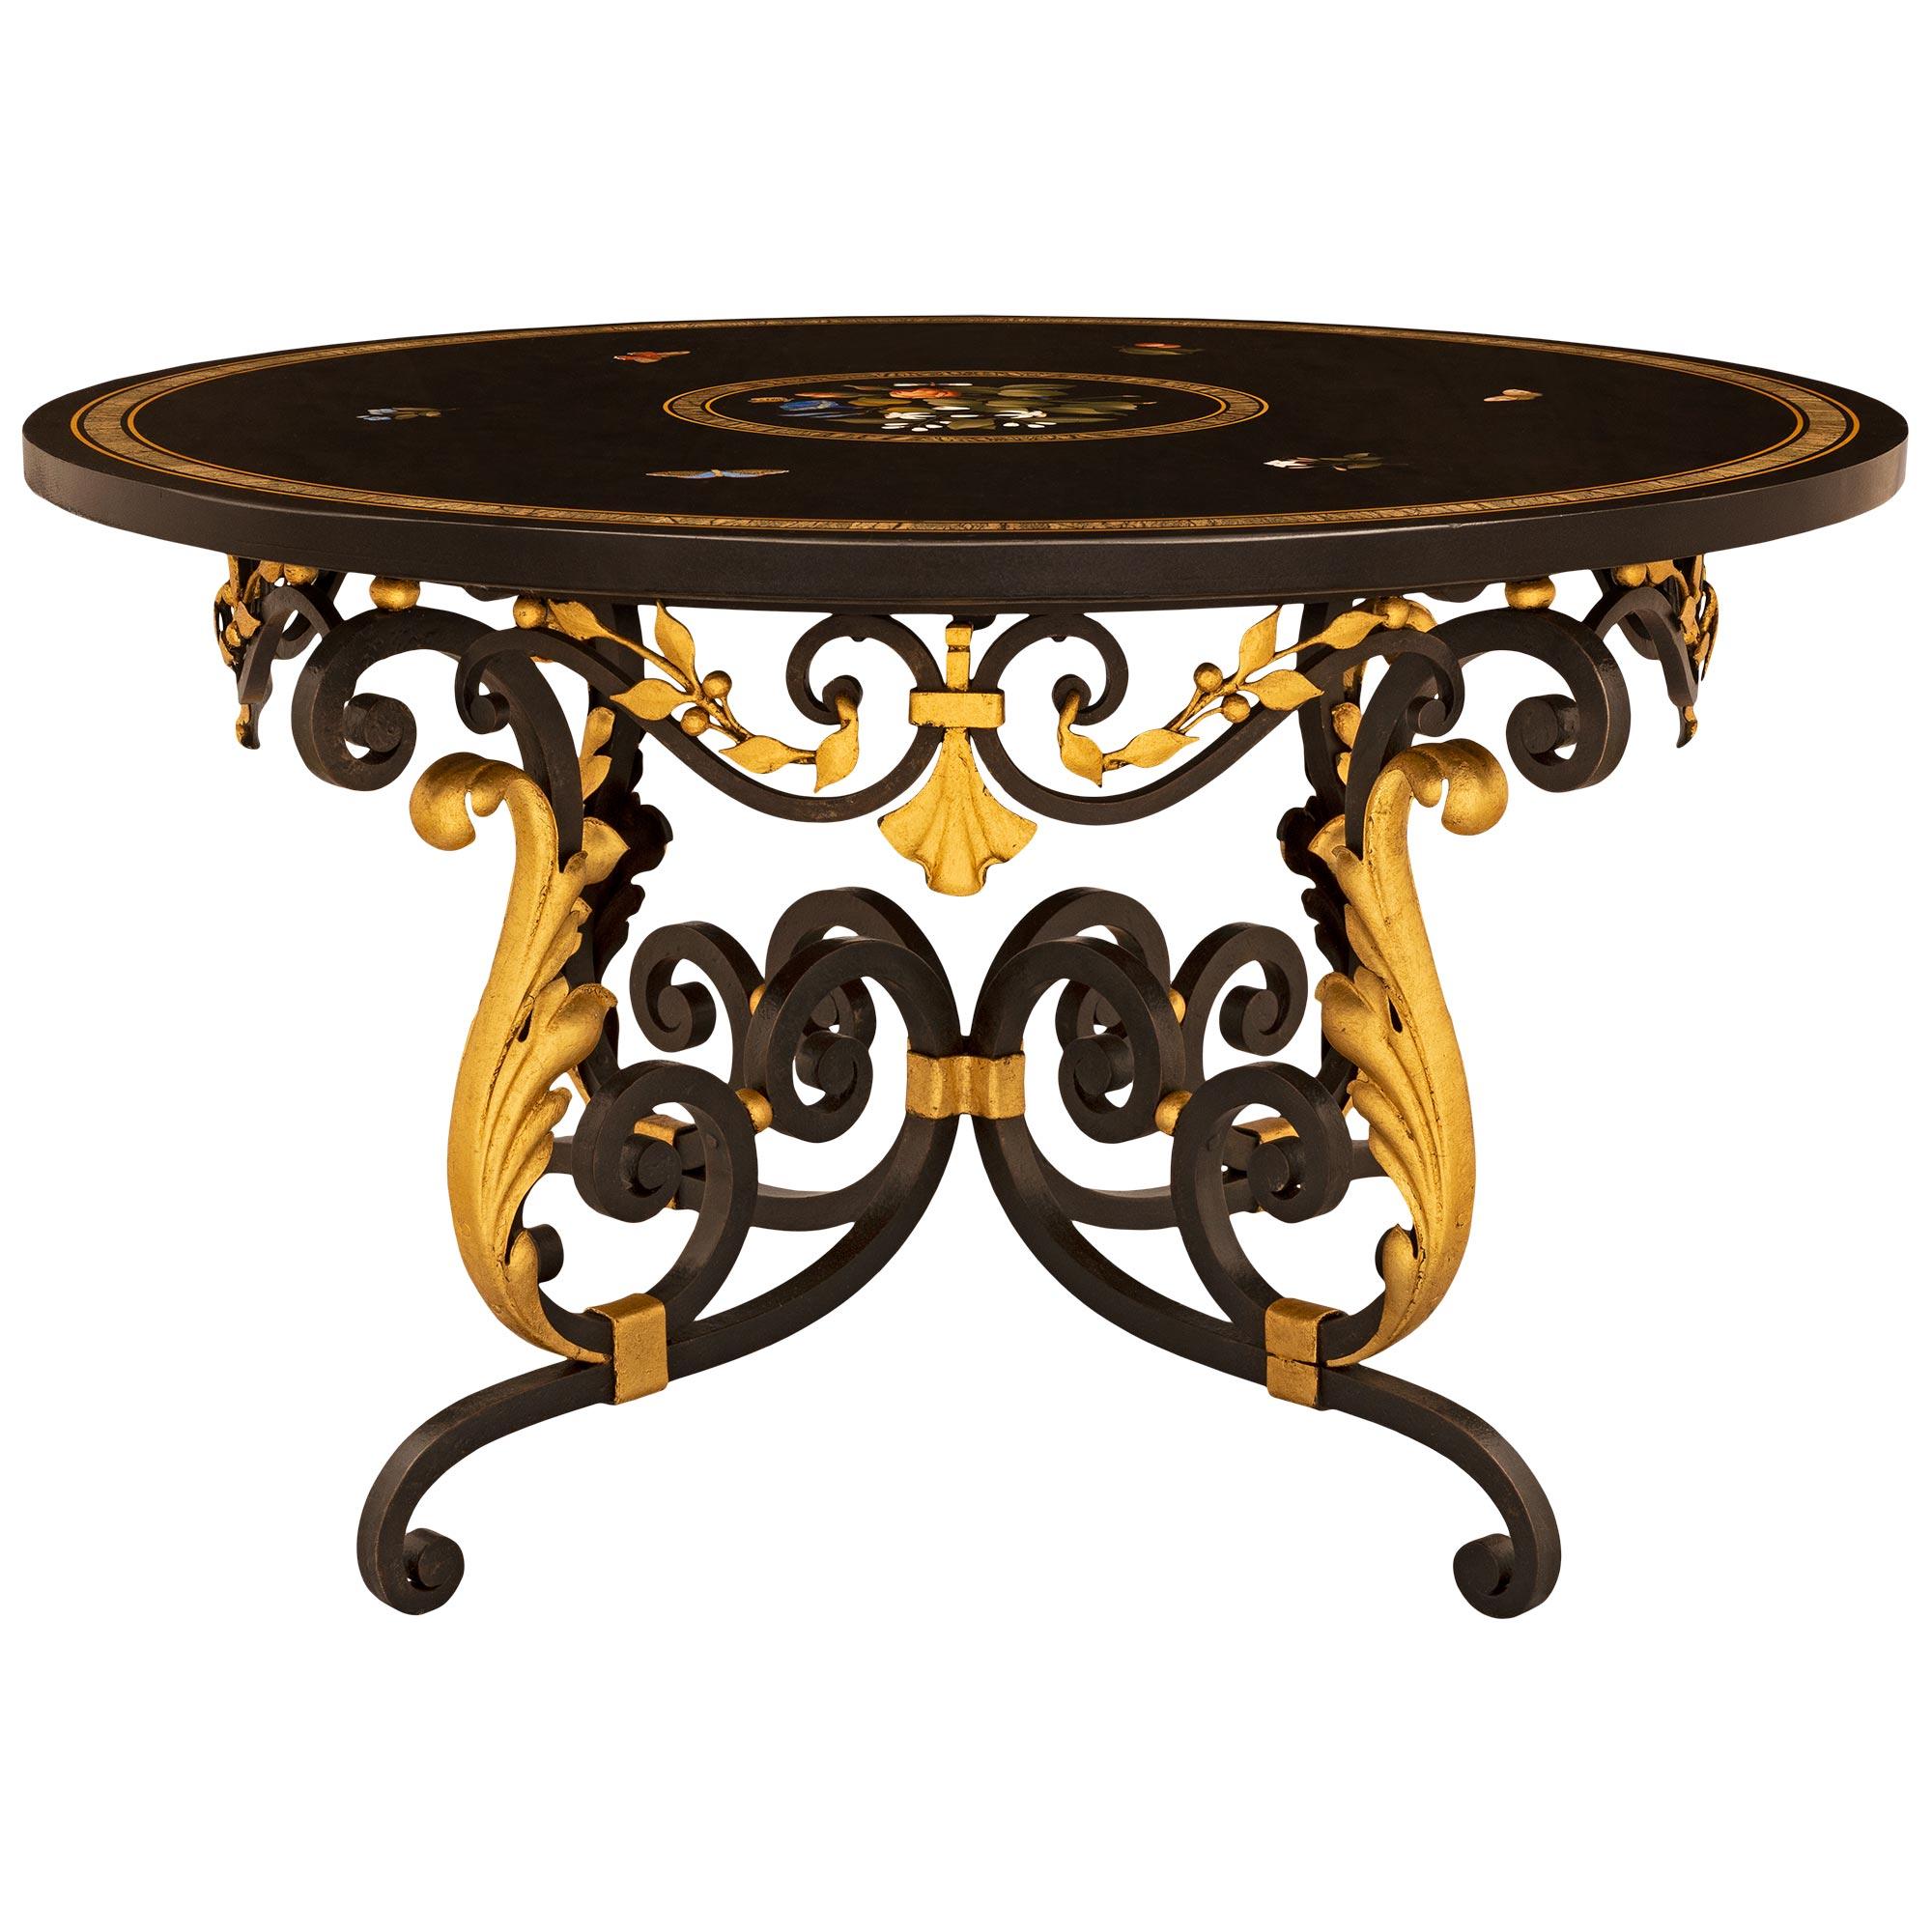 Italian 19th Century Florentine St. Wrought Iron, Gilt Metal And Marble Table In Good Condition For Sale In West Palm Beach, FL